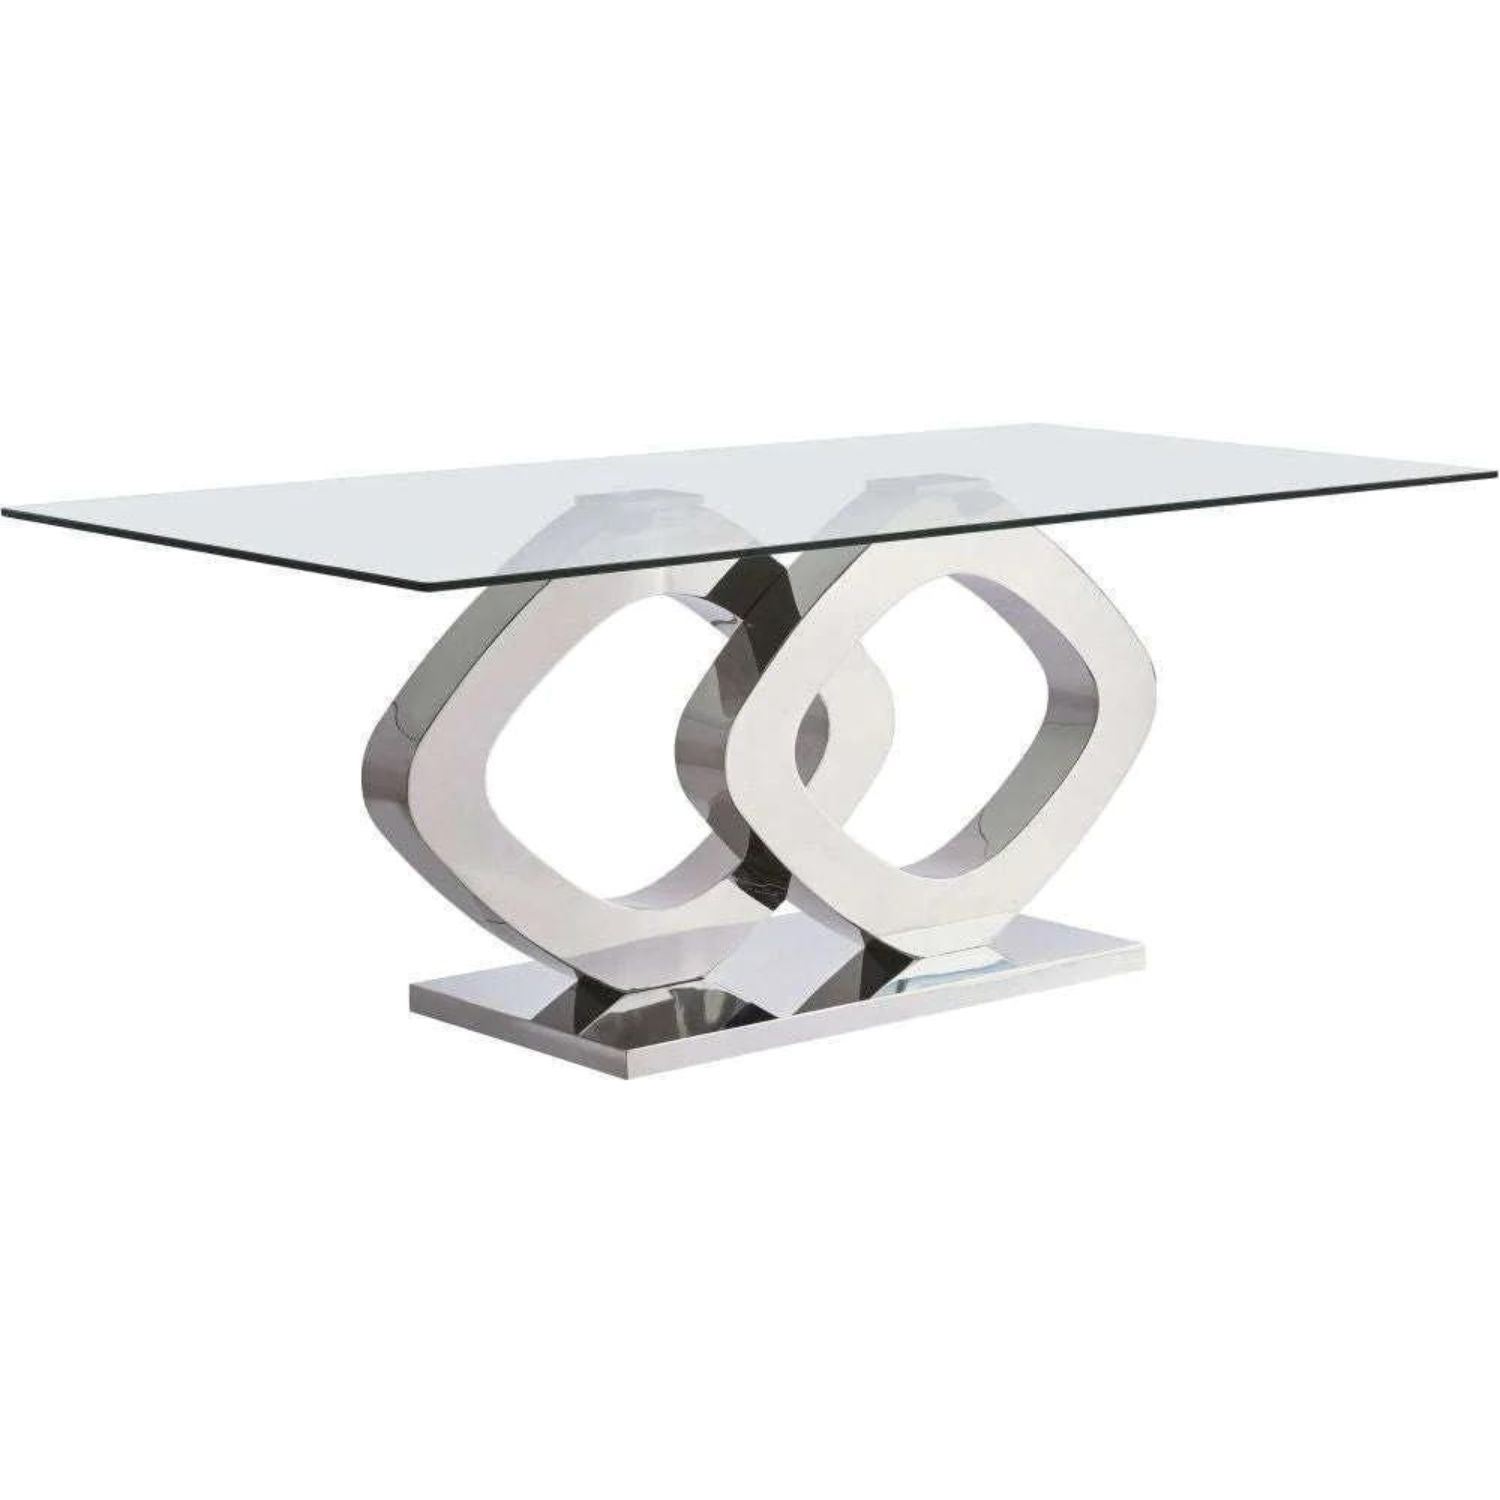 Silver 4 Seater Dining Table, Sculptural Design